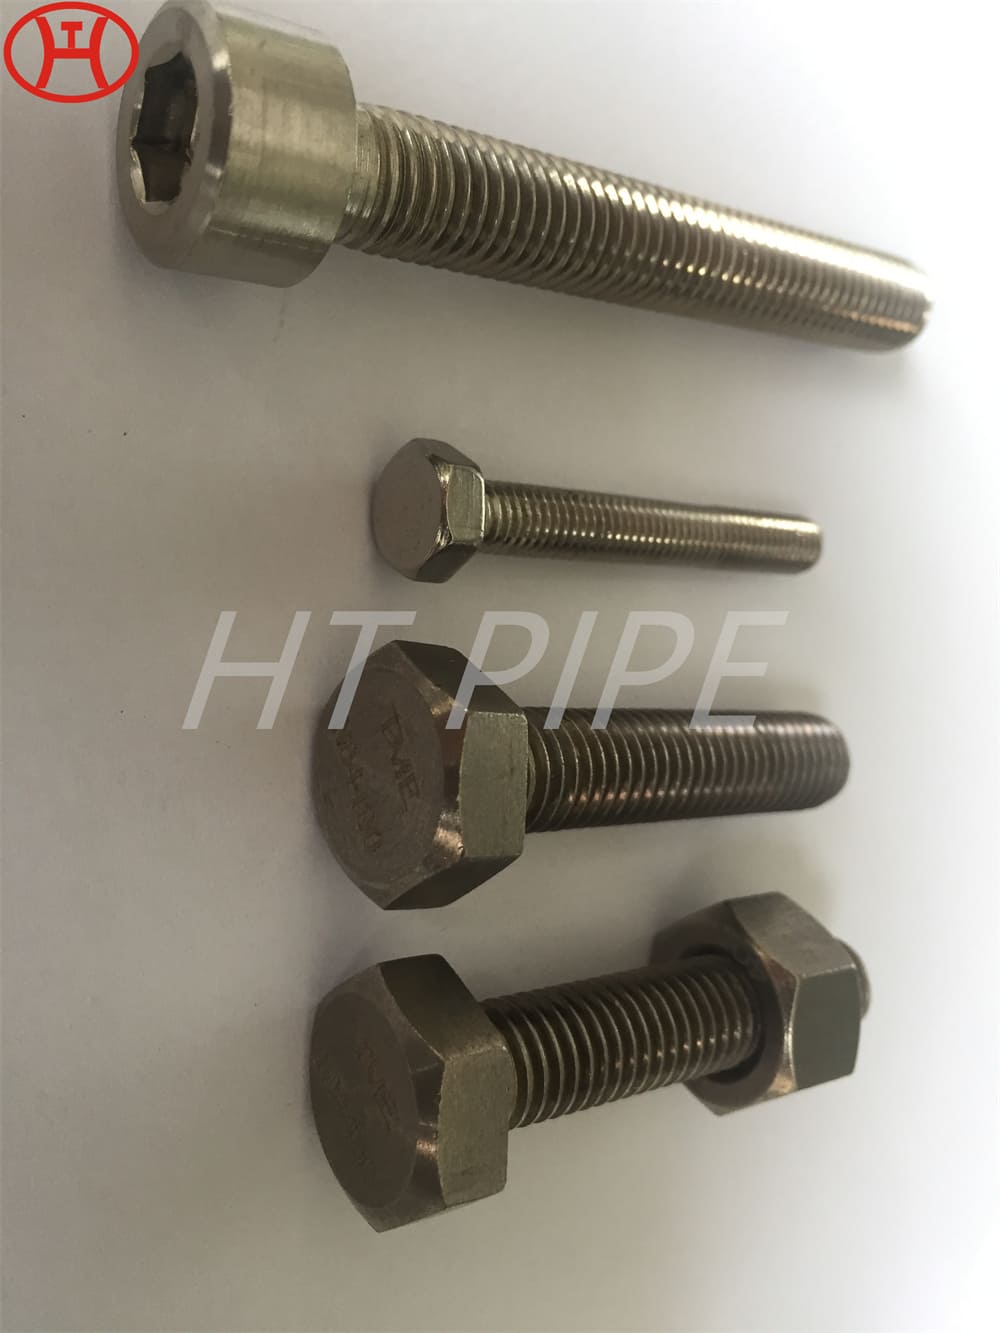 Incoloy 926 Alloy 926 1.4529 hex heavy hex bolt DIN931 ASME B18.2.1